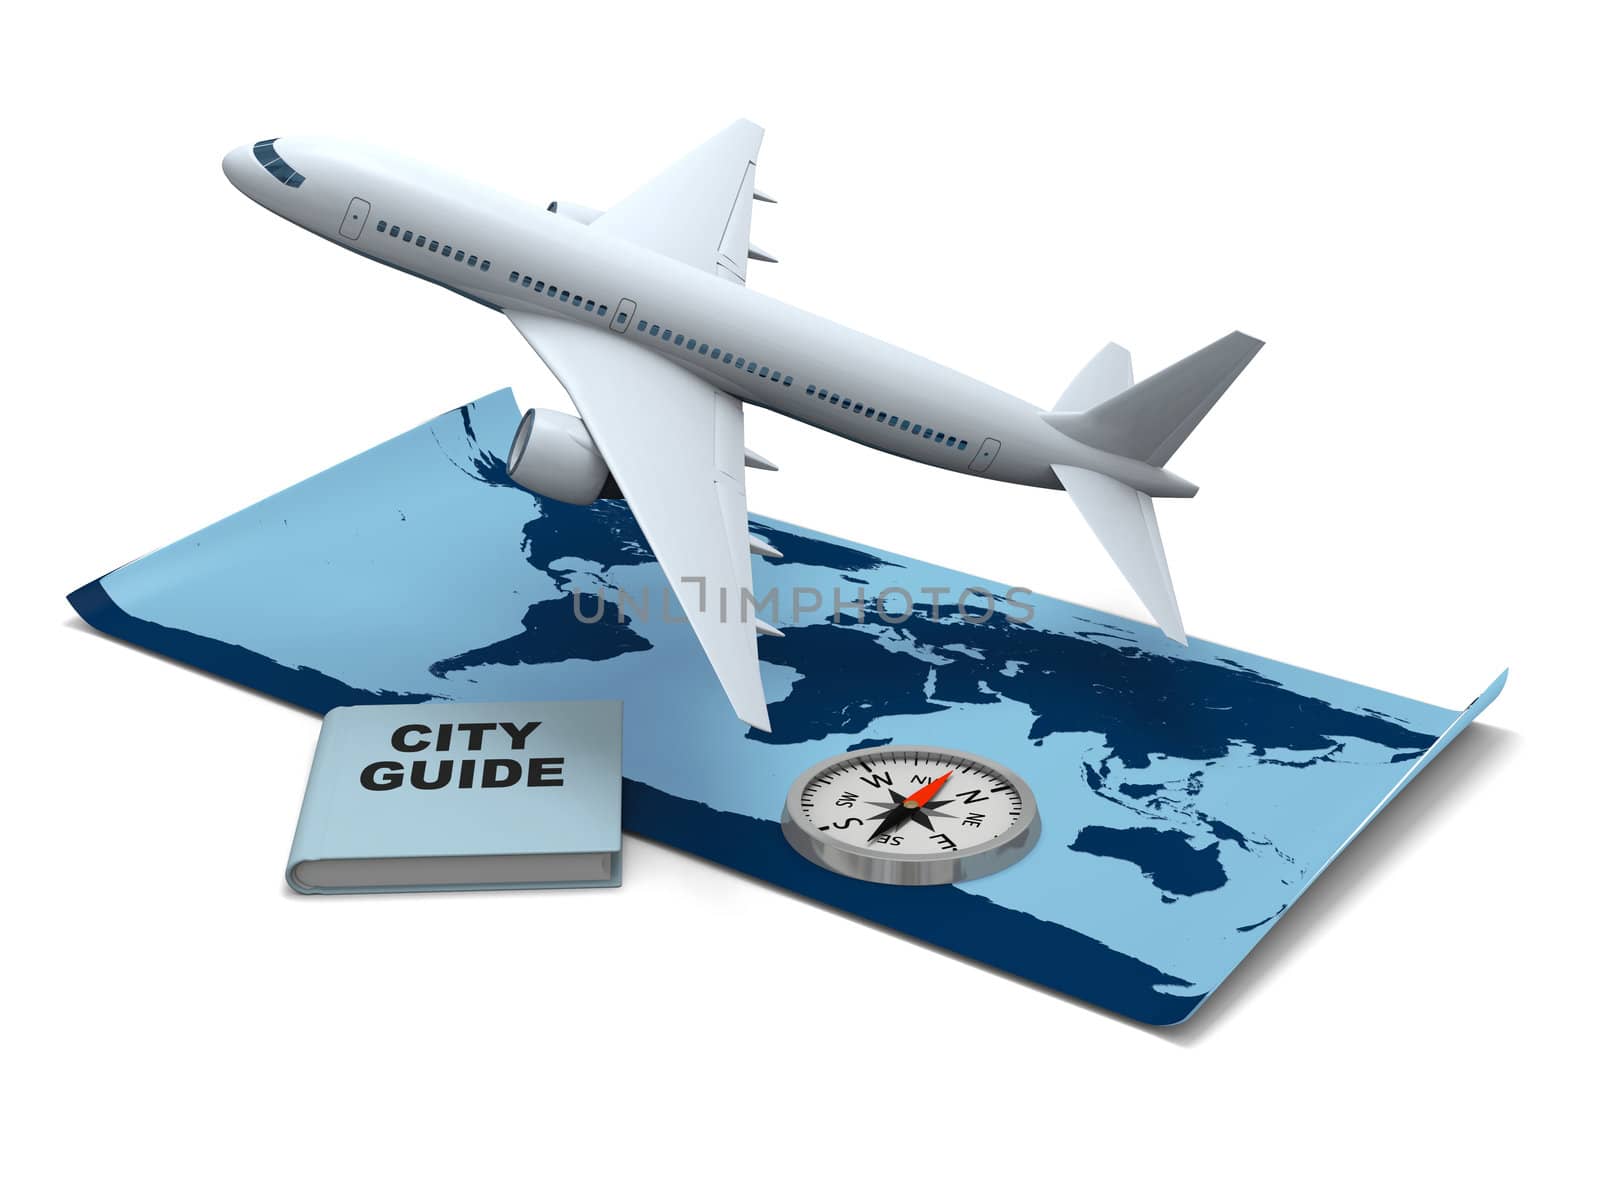 Concept of air travel with world map, aircraft, compass and city guide book. Elements of this image furnished by NASA